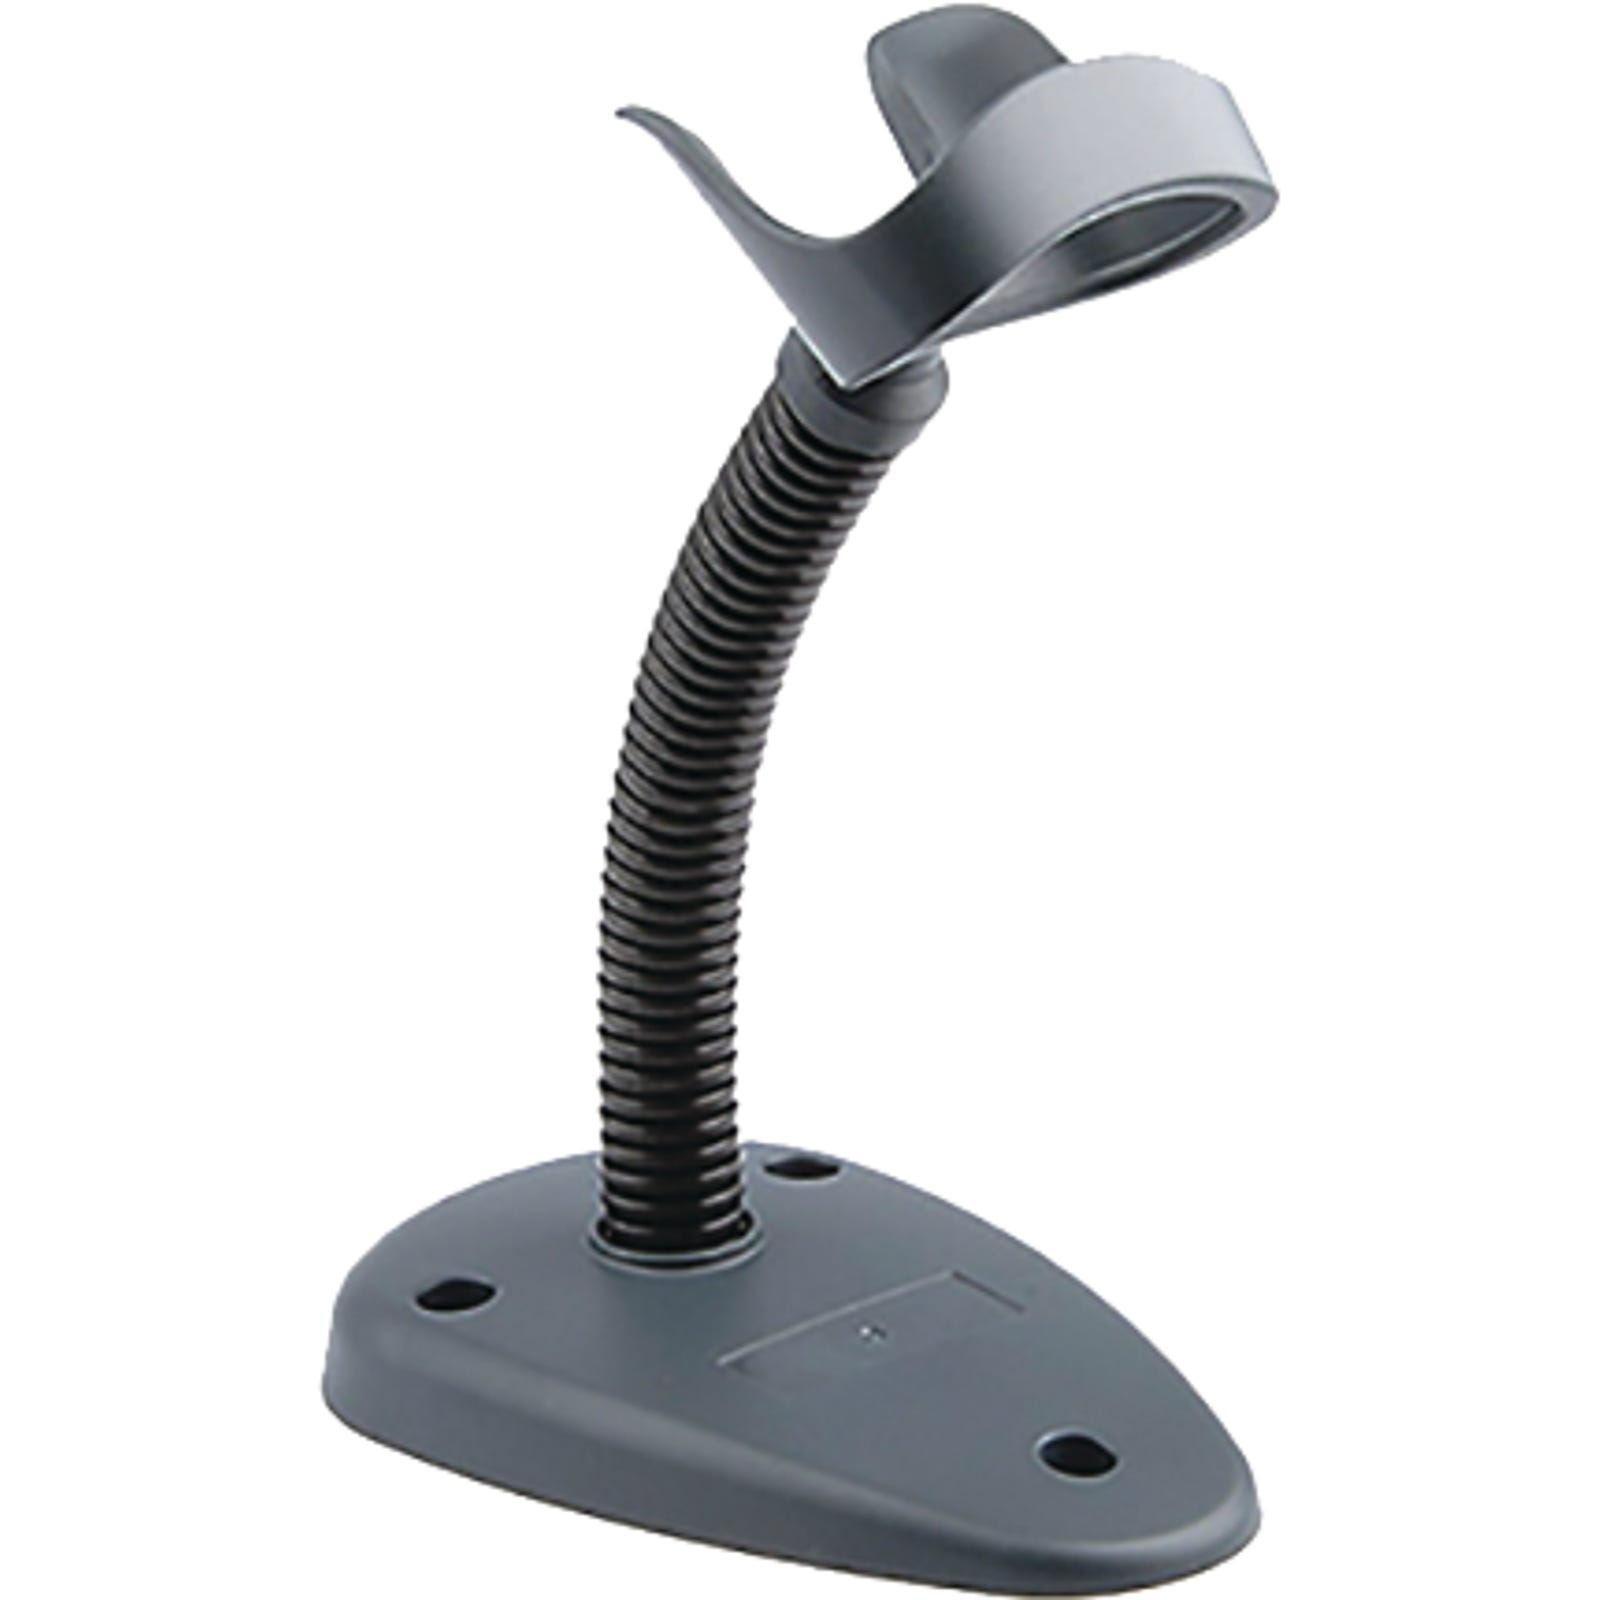 Bar Code Scanners,bar code scanners near me,barcode scanners,barcode scanner online,barcode scanning,barcode scanner price,walmart barcode scanner,Bar Code Scanners Stands,barcode scanner stand,barcode reader stand for